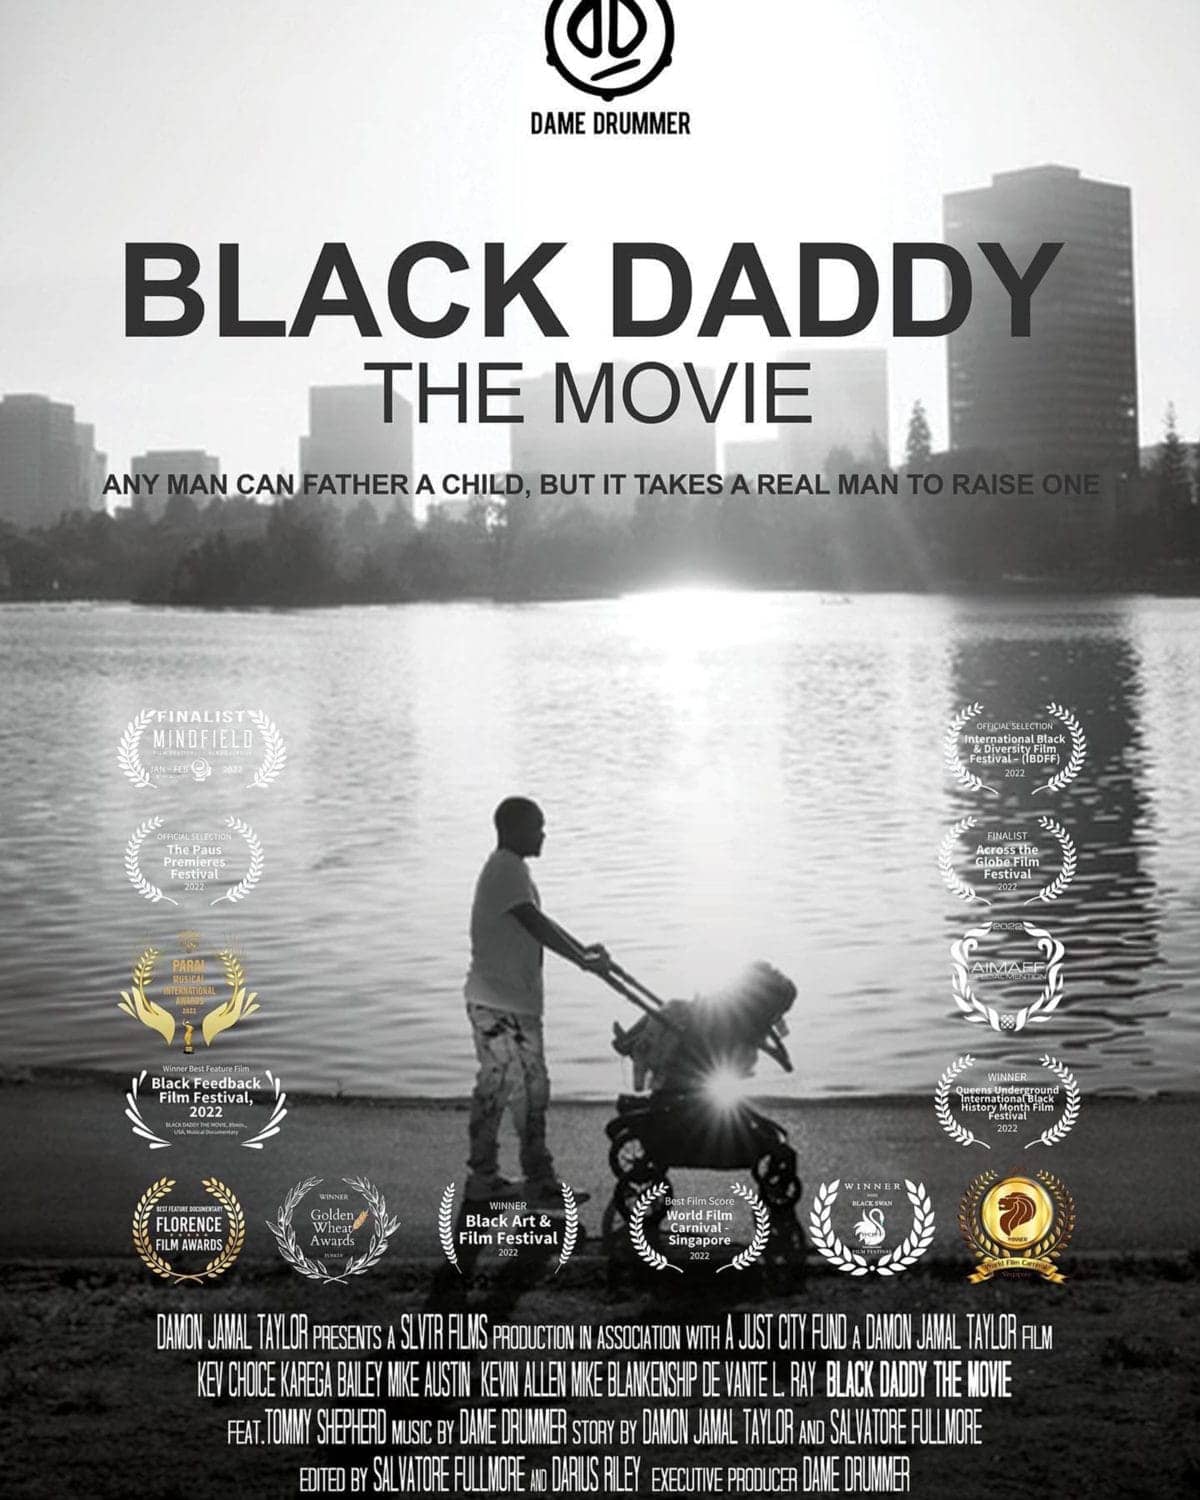 Black-Daddy-poster, ‘Black Daddy: The Movie’ screens at the 2022 San Francisco Black Film Festival, Culture Currents Local News & Views News & Views 